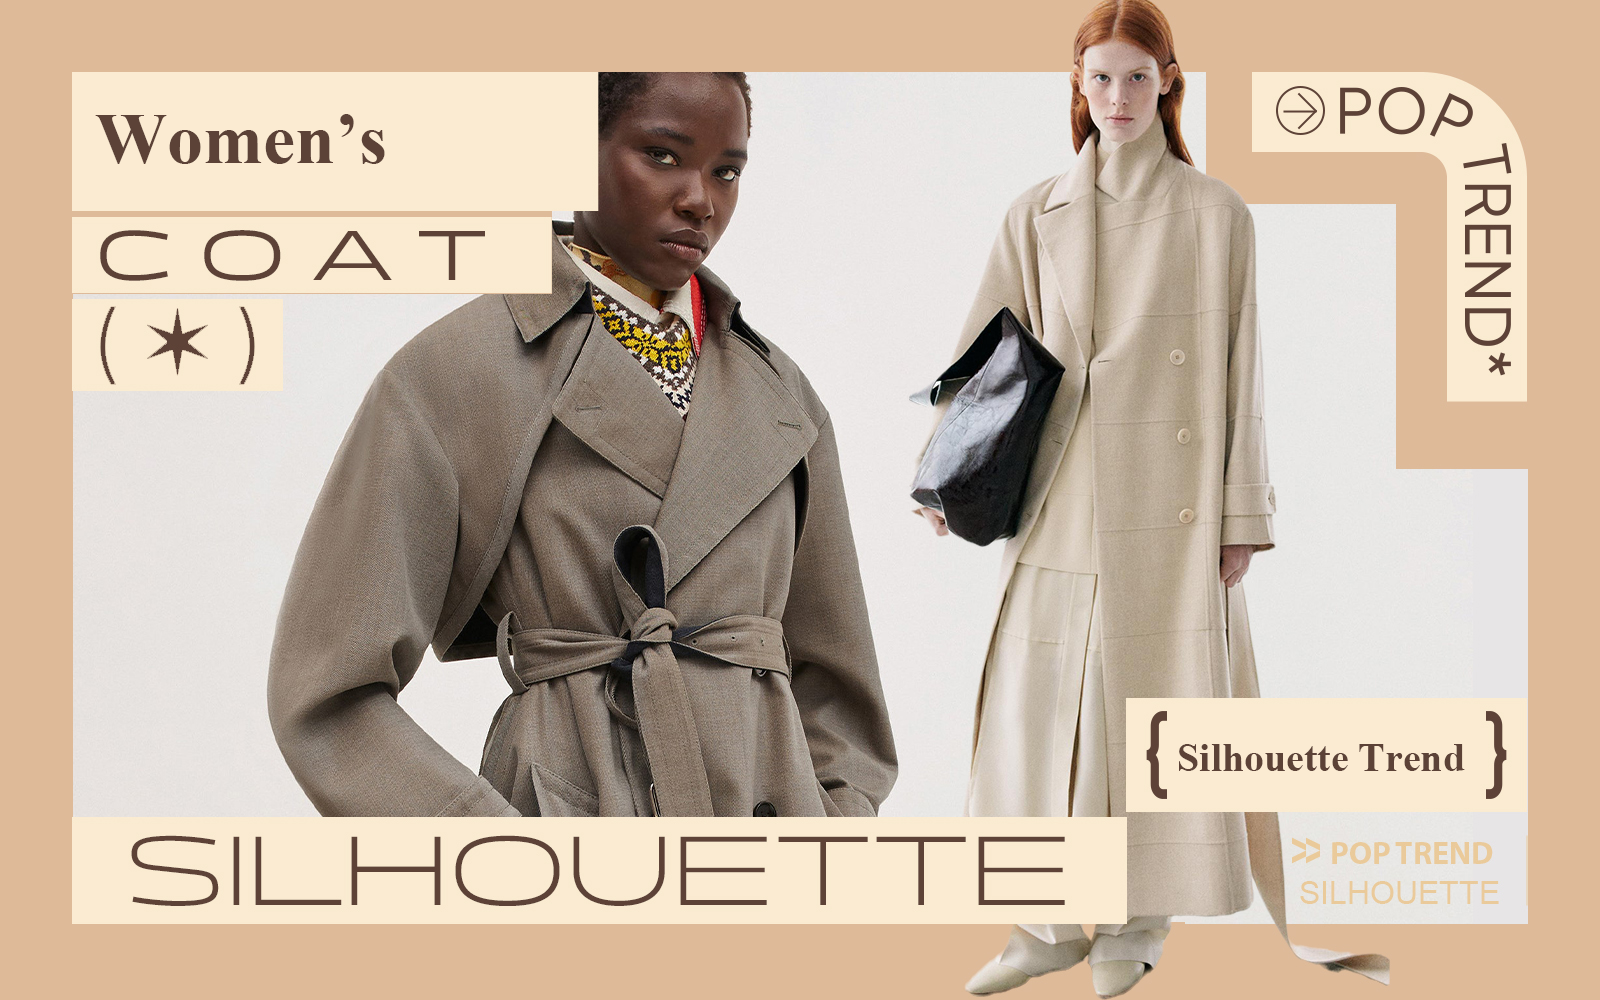 Fashionable Commuter -- The Silhouette Trend for Women's Overcoat